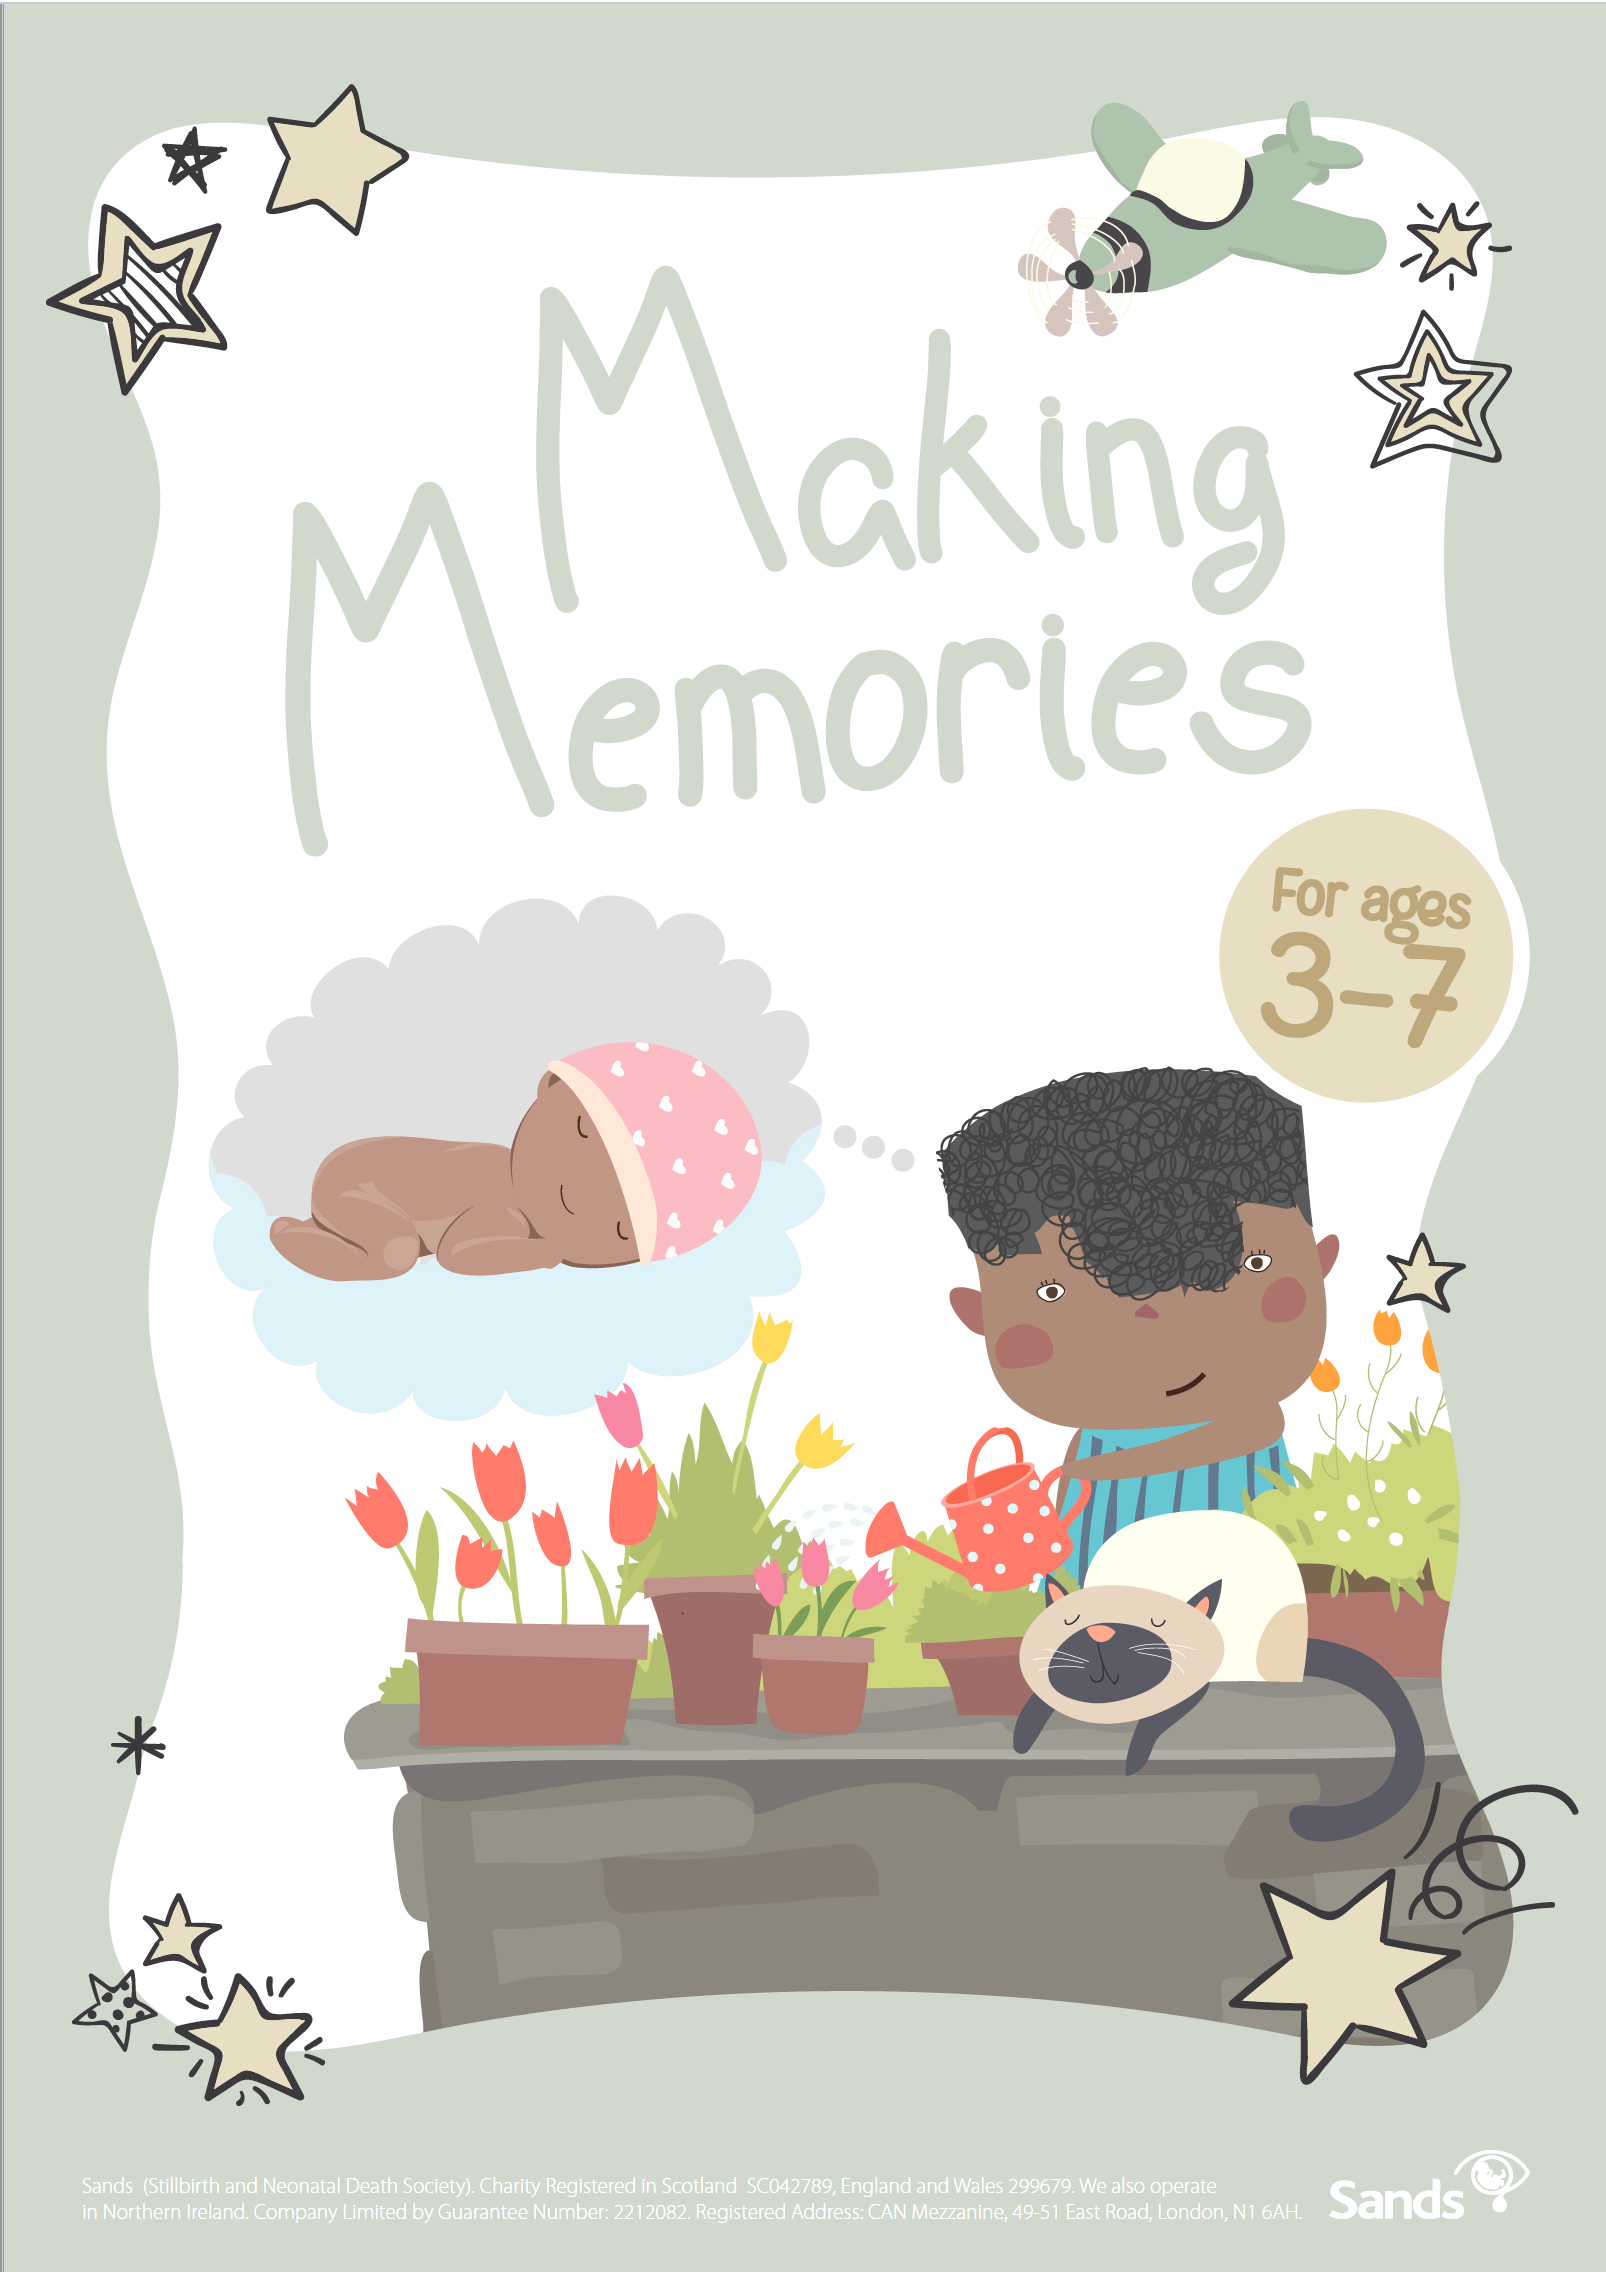 Memory Making Ages 3 - 7